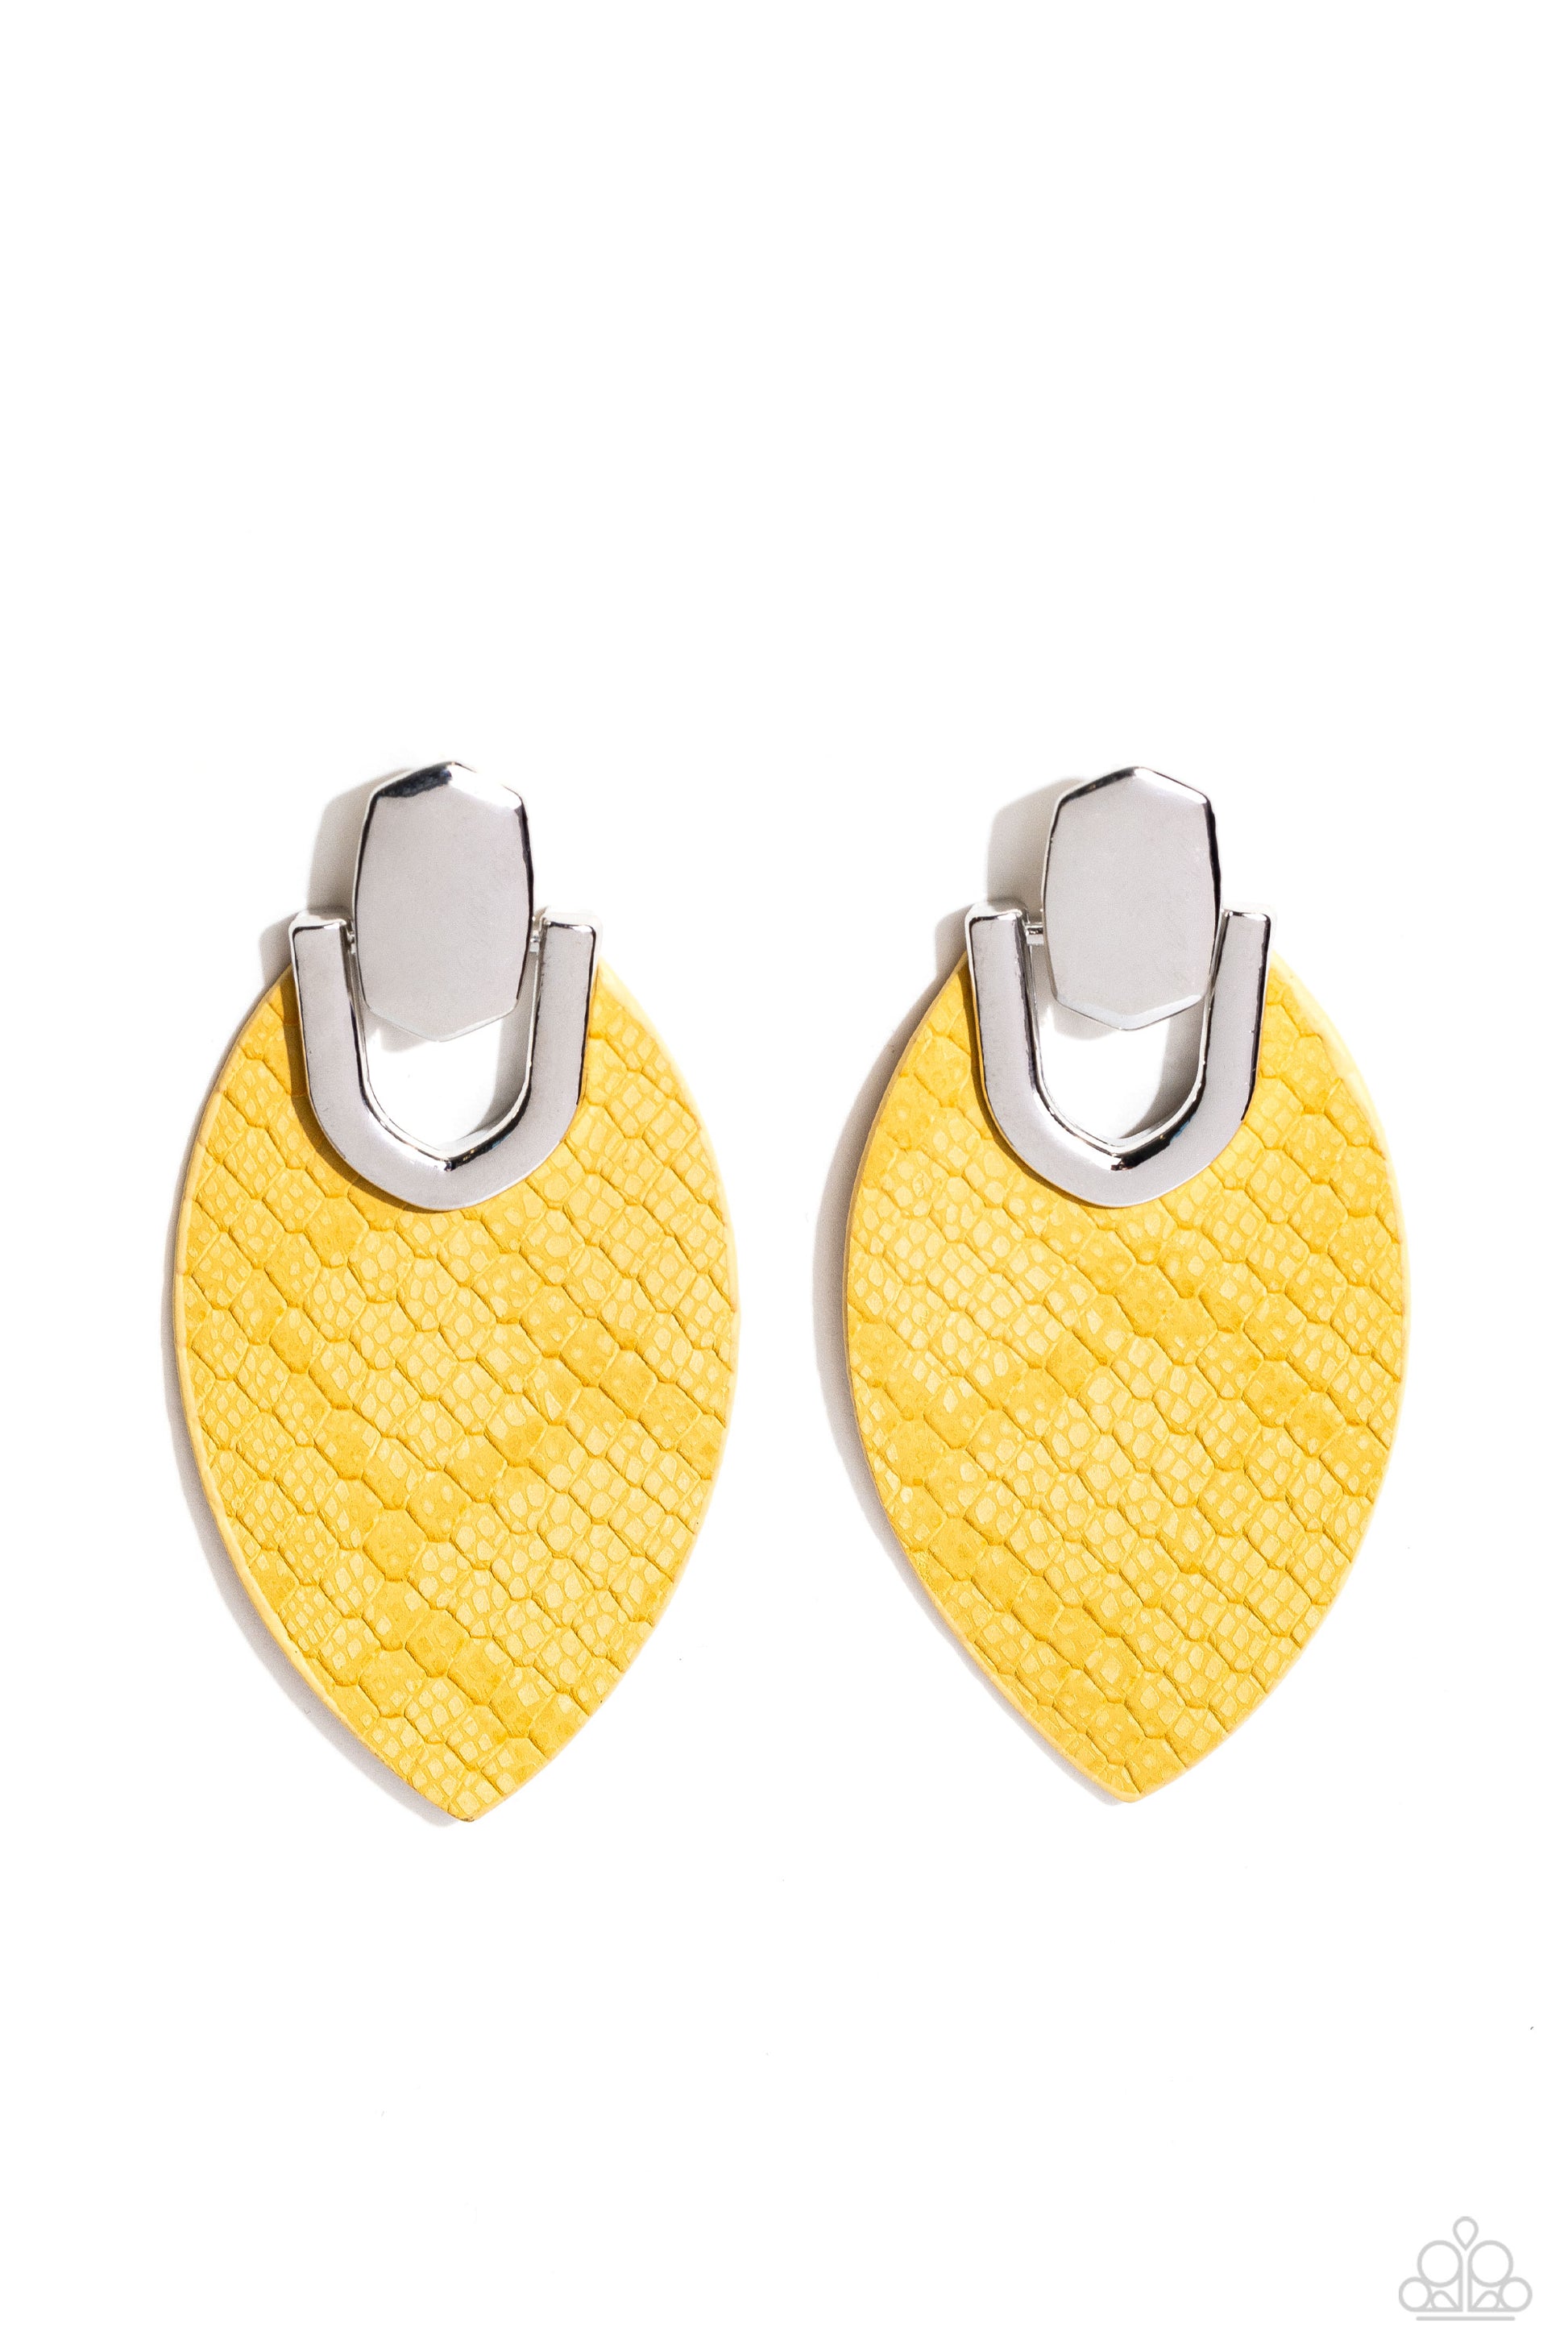 Paparazzi Accessories - Wildly Workable - Yellow Earring featuring python-like texture, an oval yellow leather frame attaches to a bold silver fitting, creating a wild lure. Earring attaches to a standard post fitting.  Sold as one pair of post earrings.